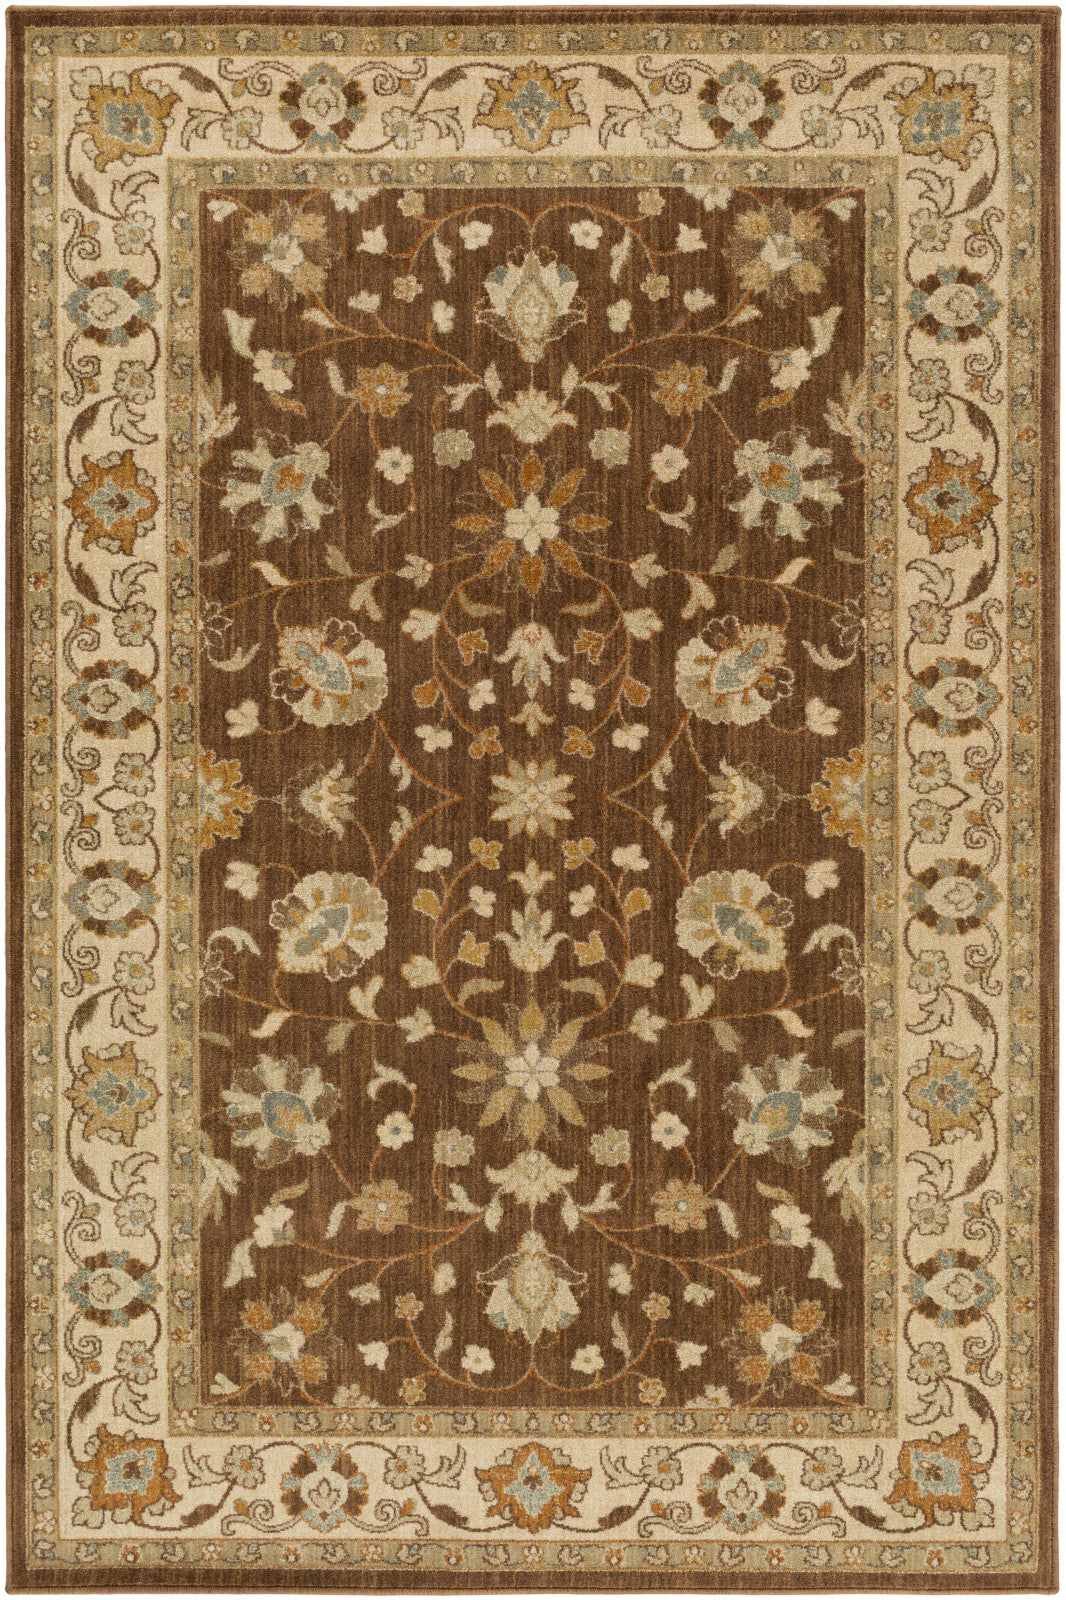 Surya Willow Lodge WLL-1003 Brown Area Rug by Mossy Oak